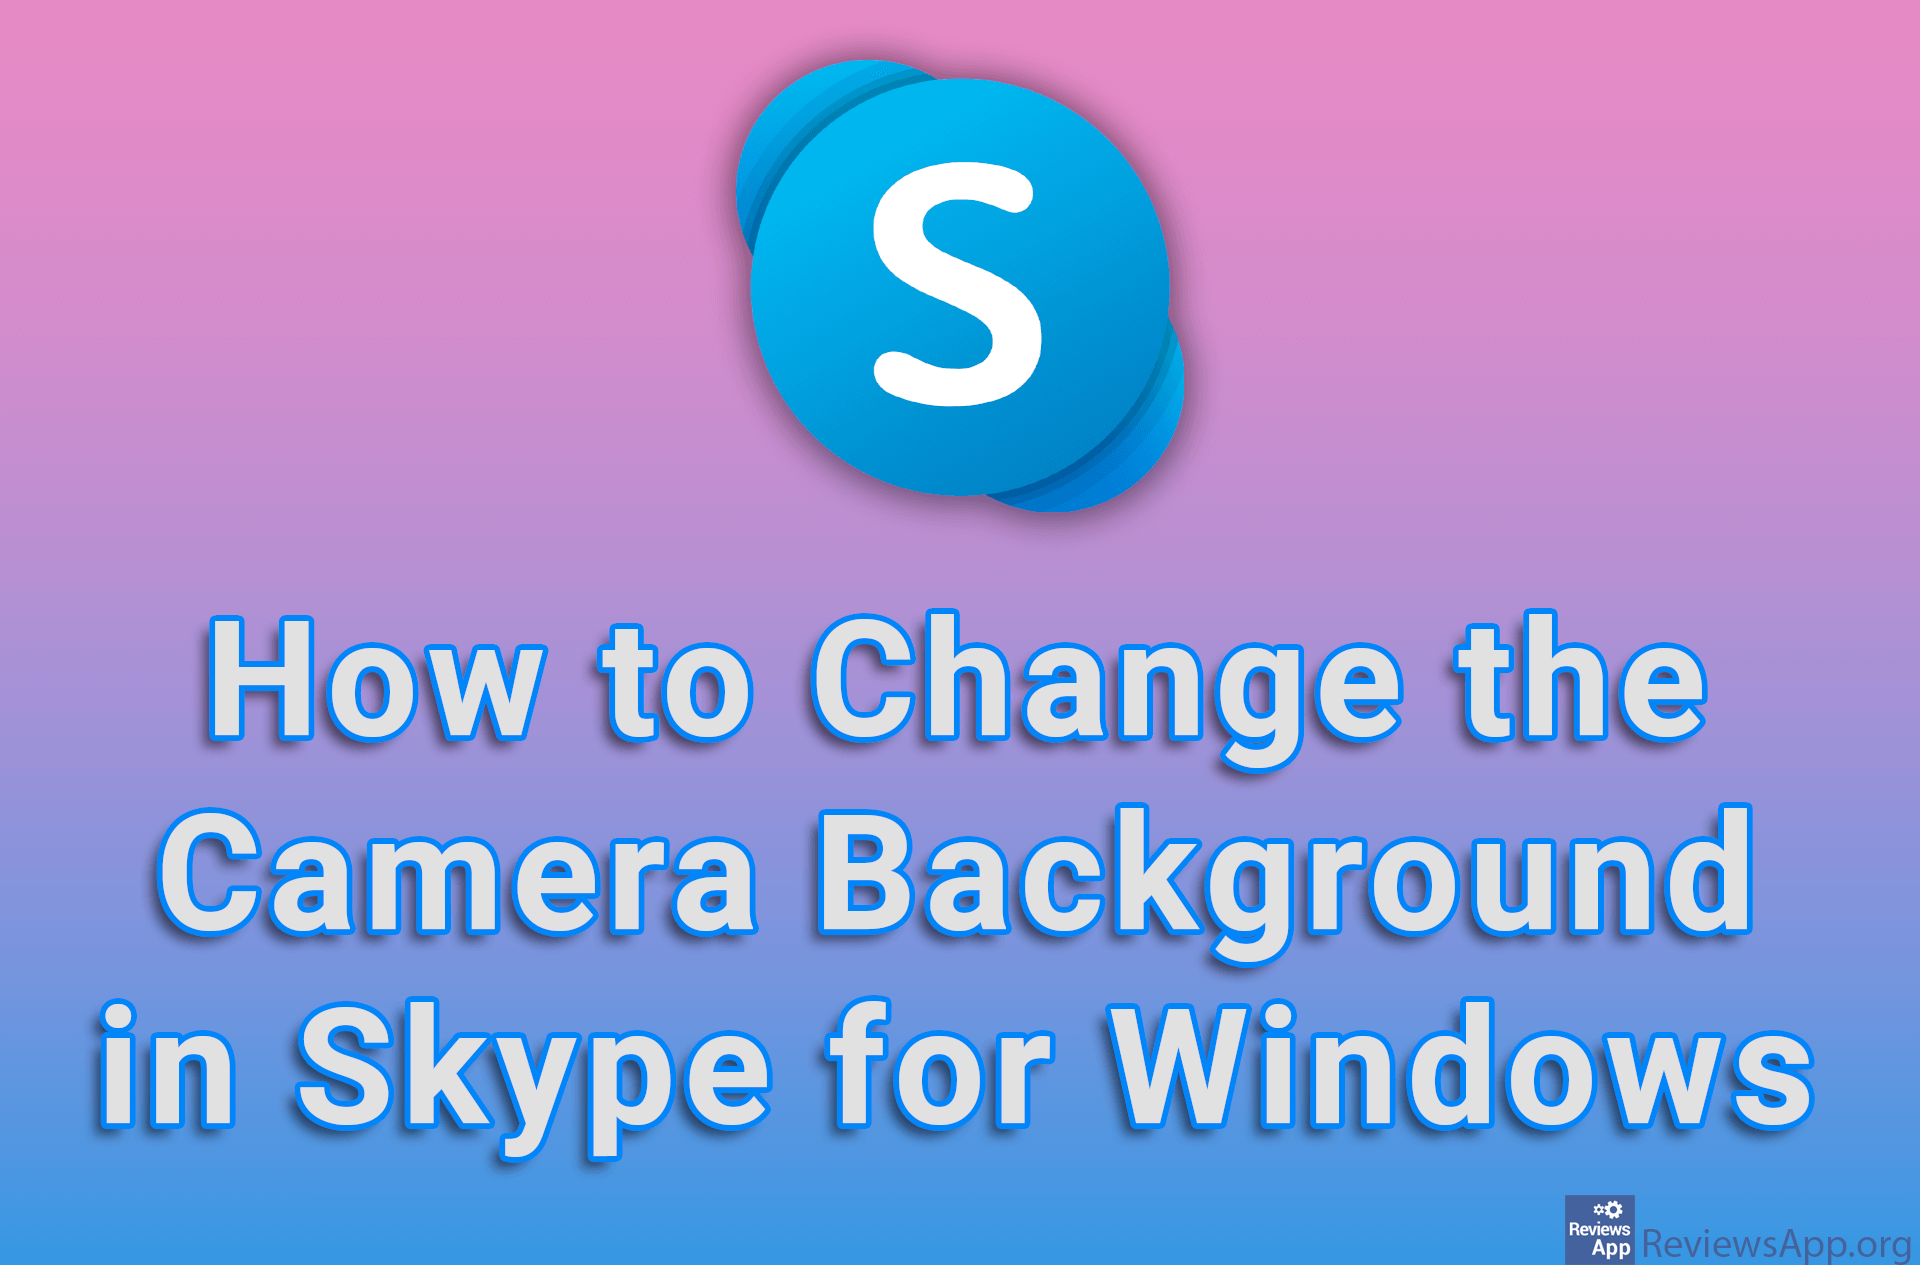 How to Change the Camera Background in Skype for Windows